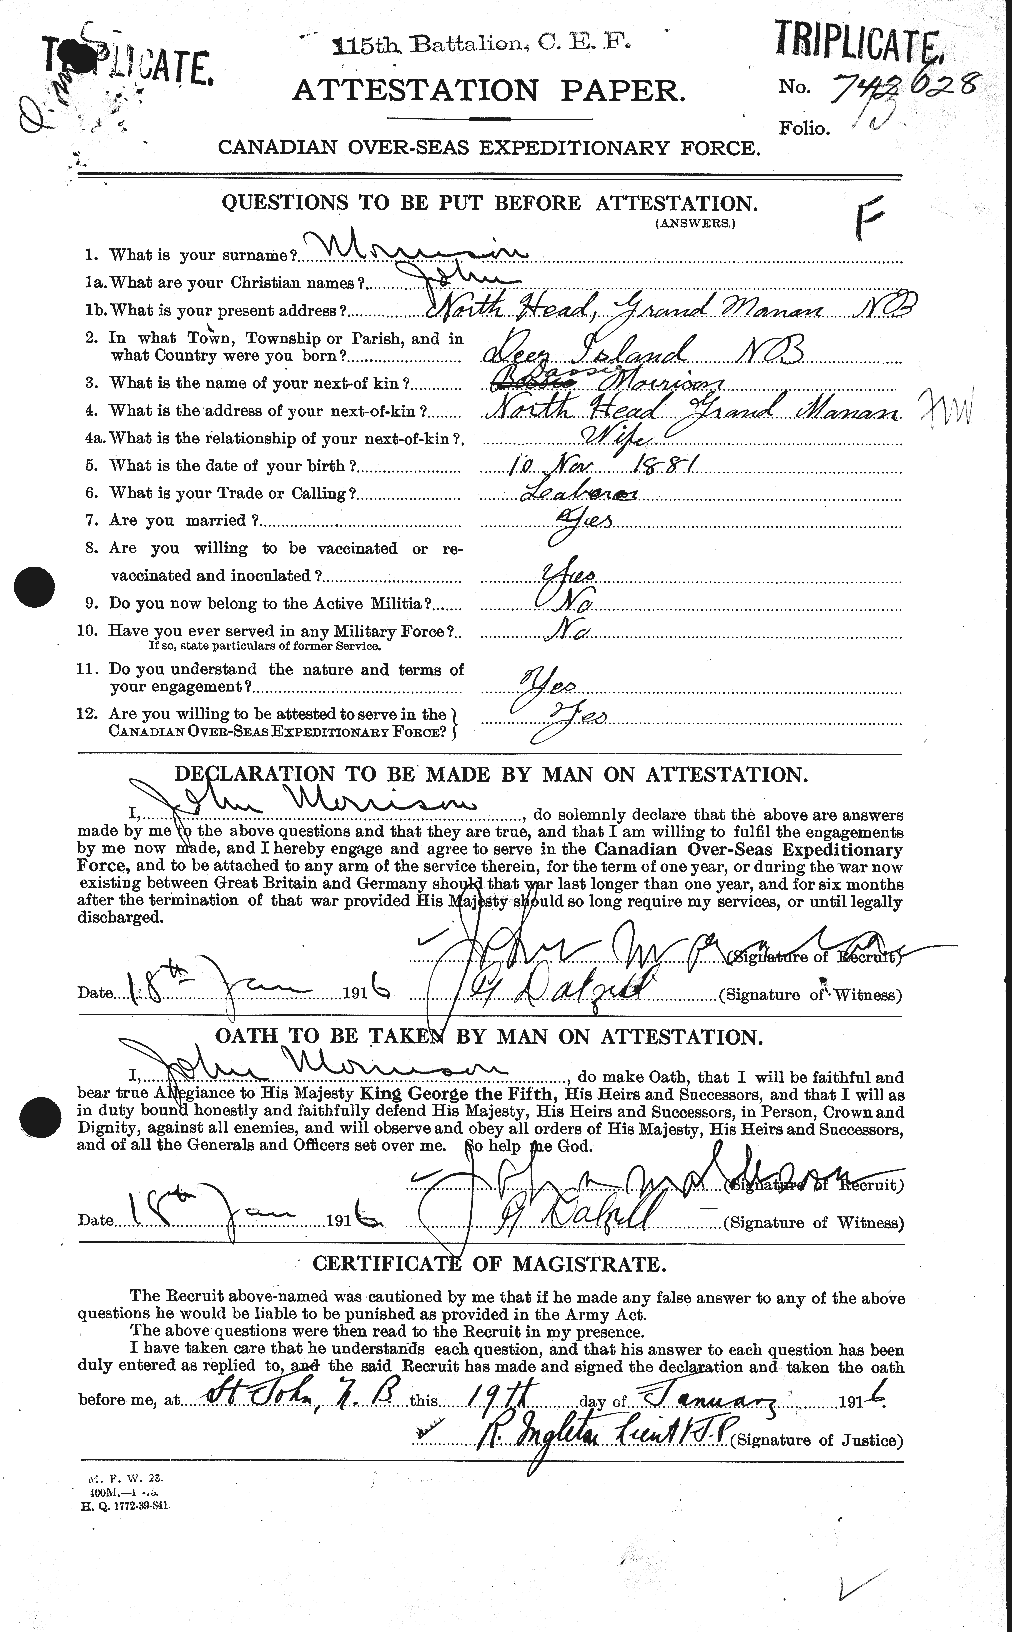 Personnel Records of the First World War - CEF 506986a